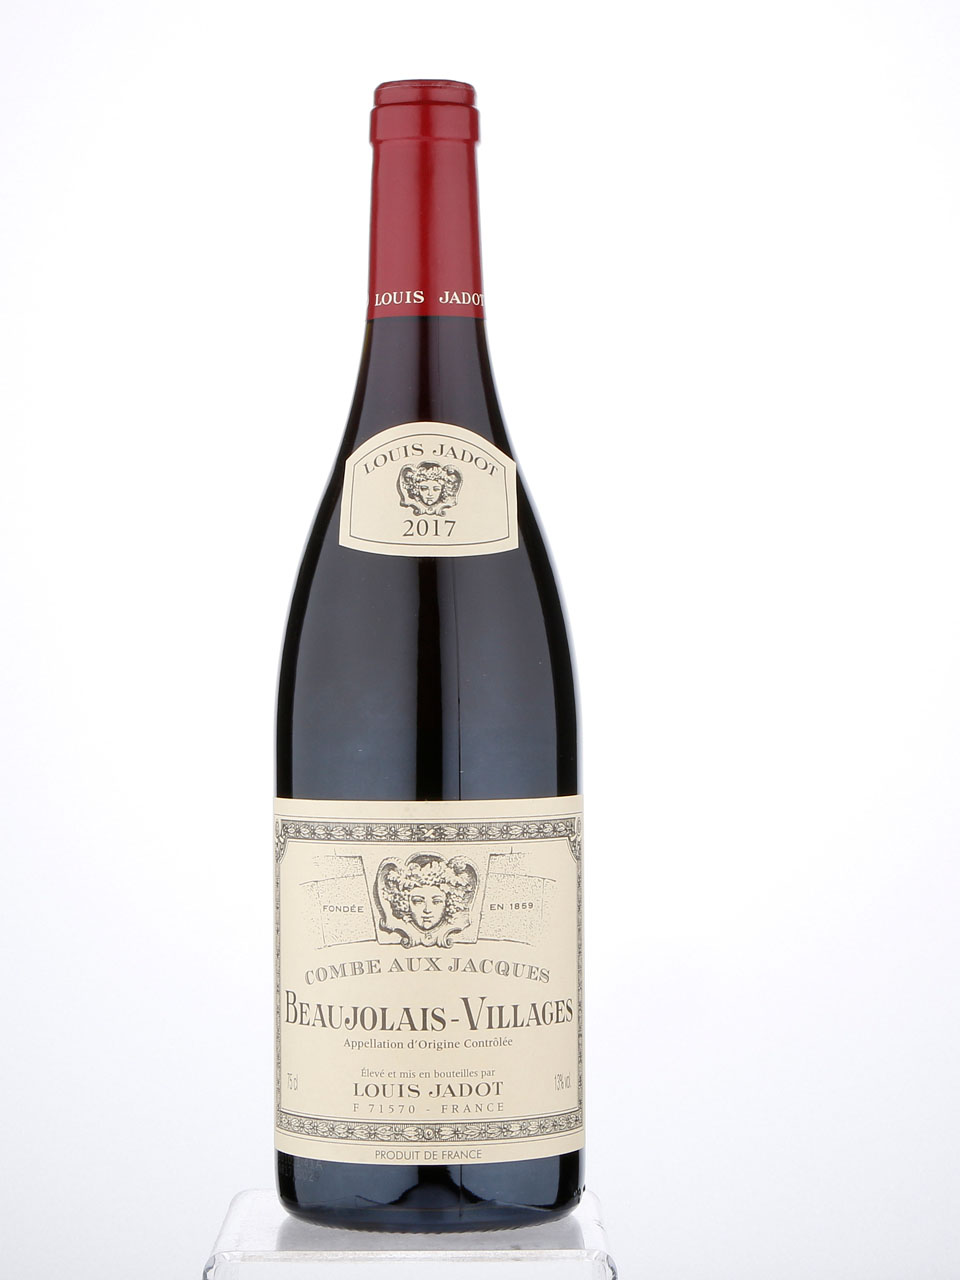 BEAUJOLAIS VILLAGES - LOUIS JADOT COMBE AUX JACQUES French Red Wine